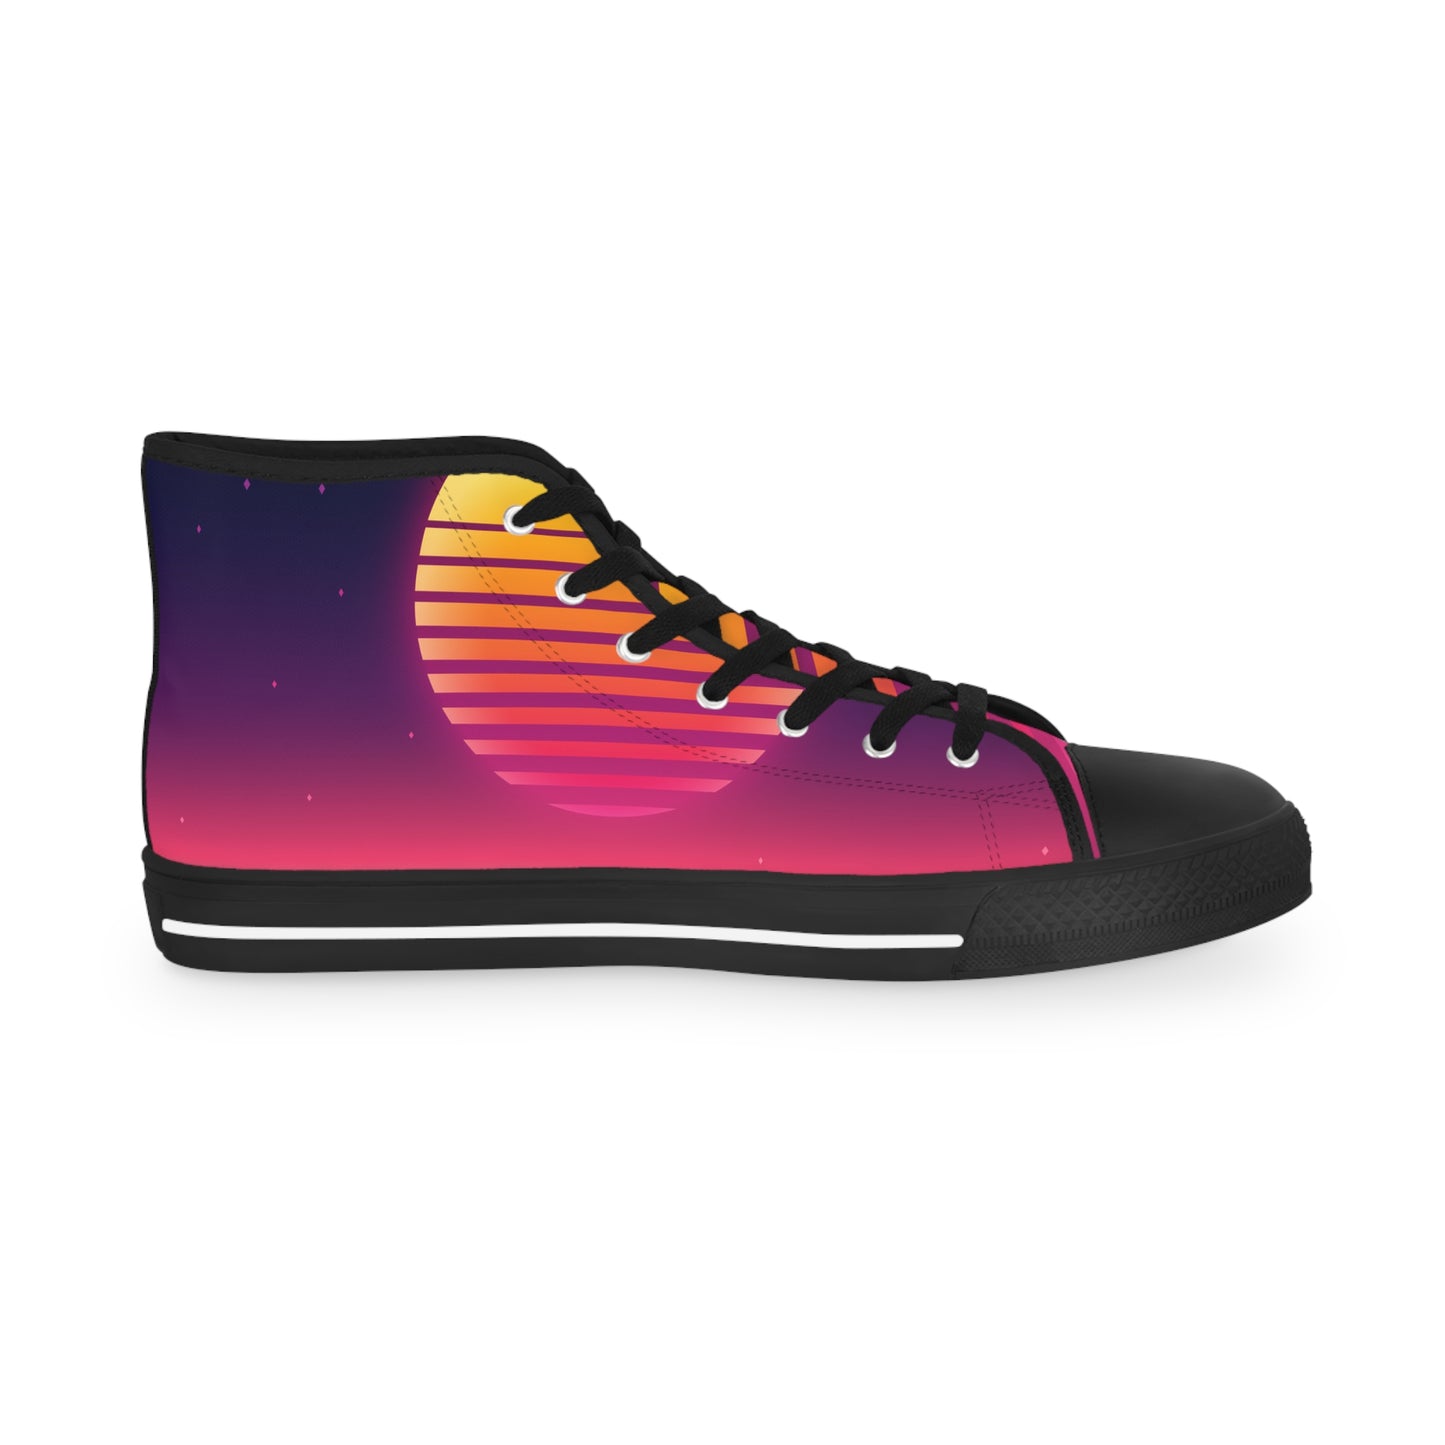 Limited Edition High Top Sneakers - Death Matrix